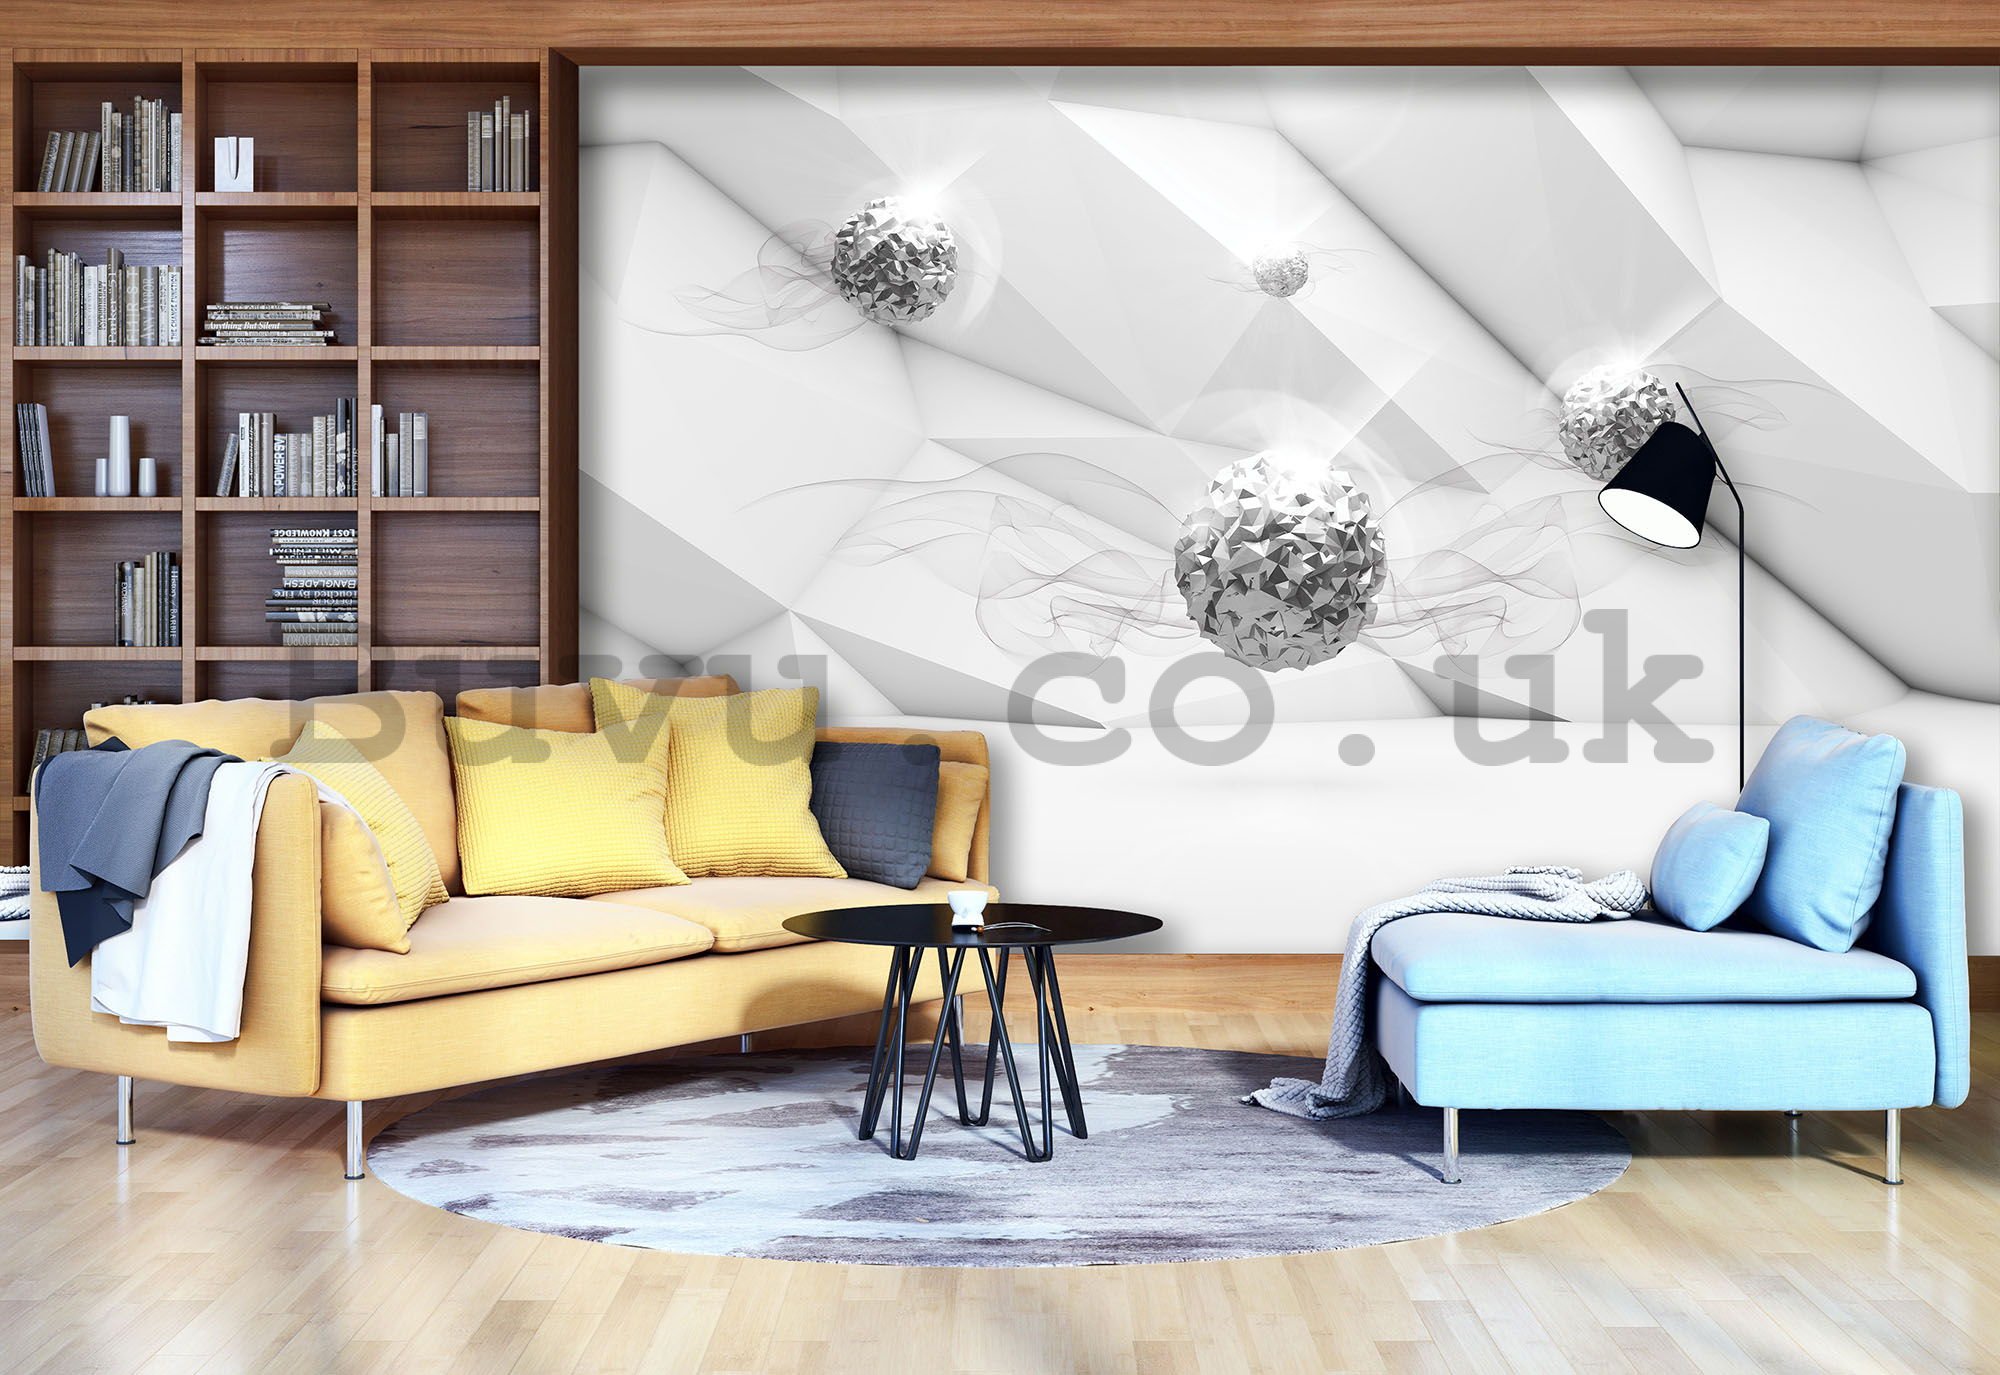 Wall mural vlies: Spherical Abstraction (1) - 184x254 cm